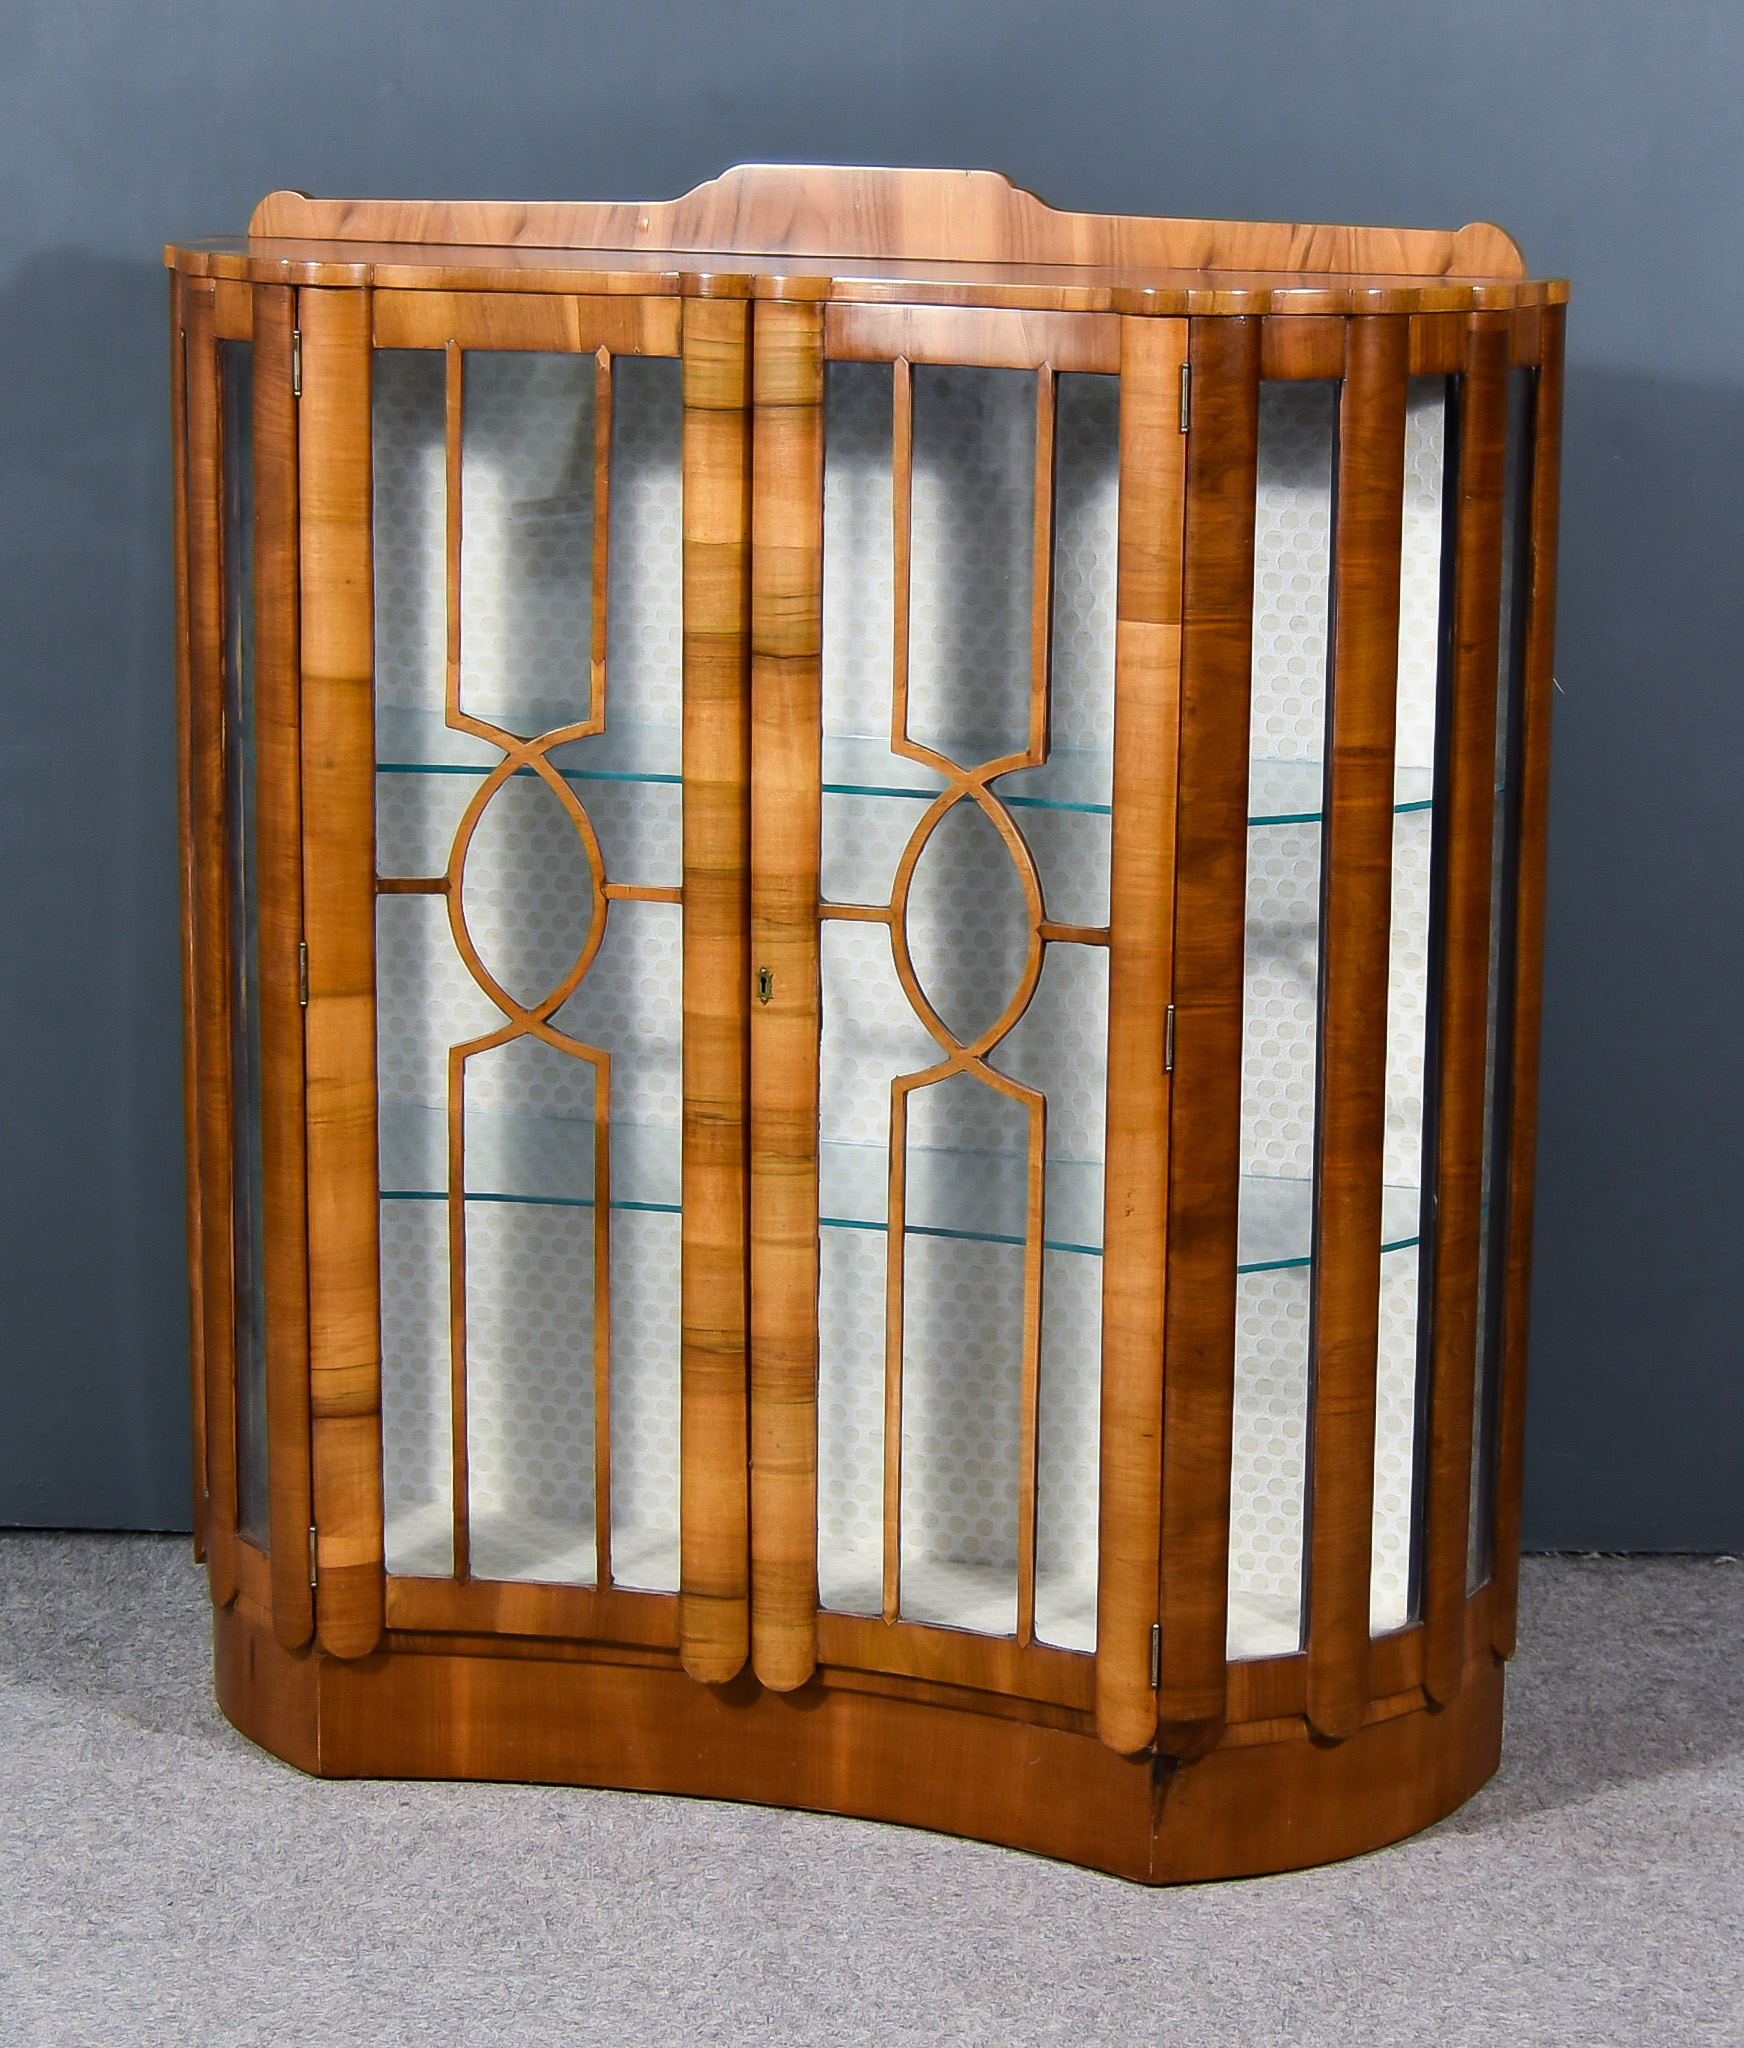 A 20th Century Figured Walnut Display Cabinet of "Art Deco" Design, fitted three glass shelves